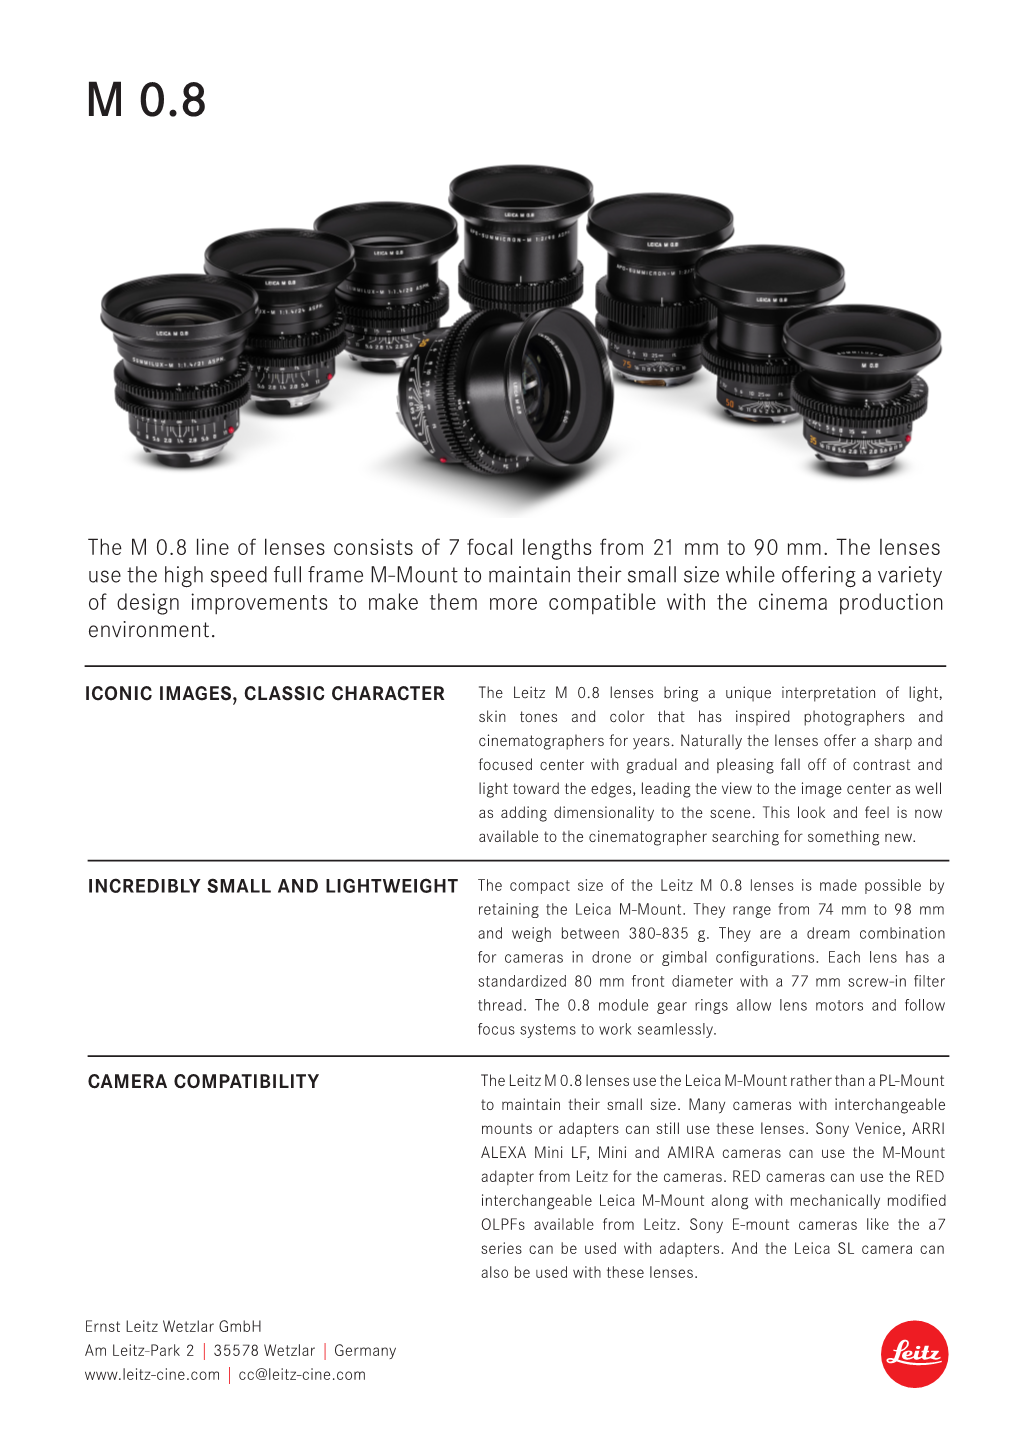 The M 0.8 Line of Lenses Consists of 7 Focal Lengths from 21 Mm to 90 Mm